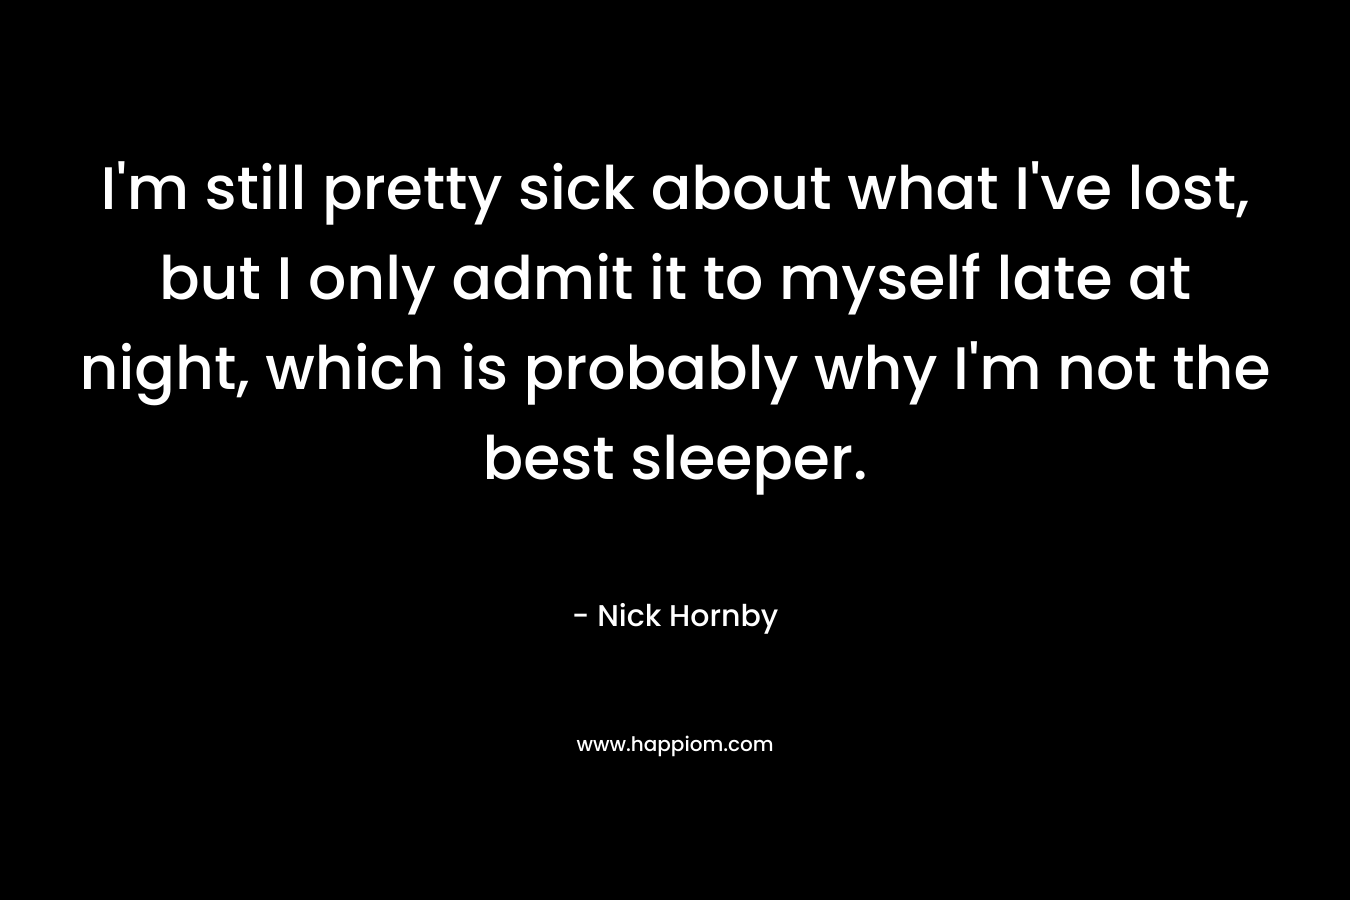 I’m still pretty sick about what I’ve lost, but I only admit it to myself late at night, which is probably why I’m not the best sleeper. – Nick Hornby